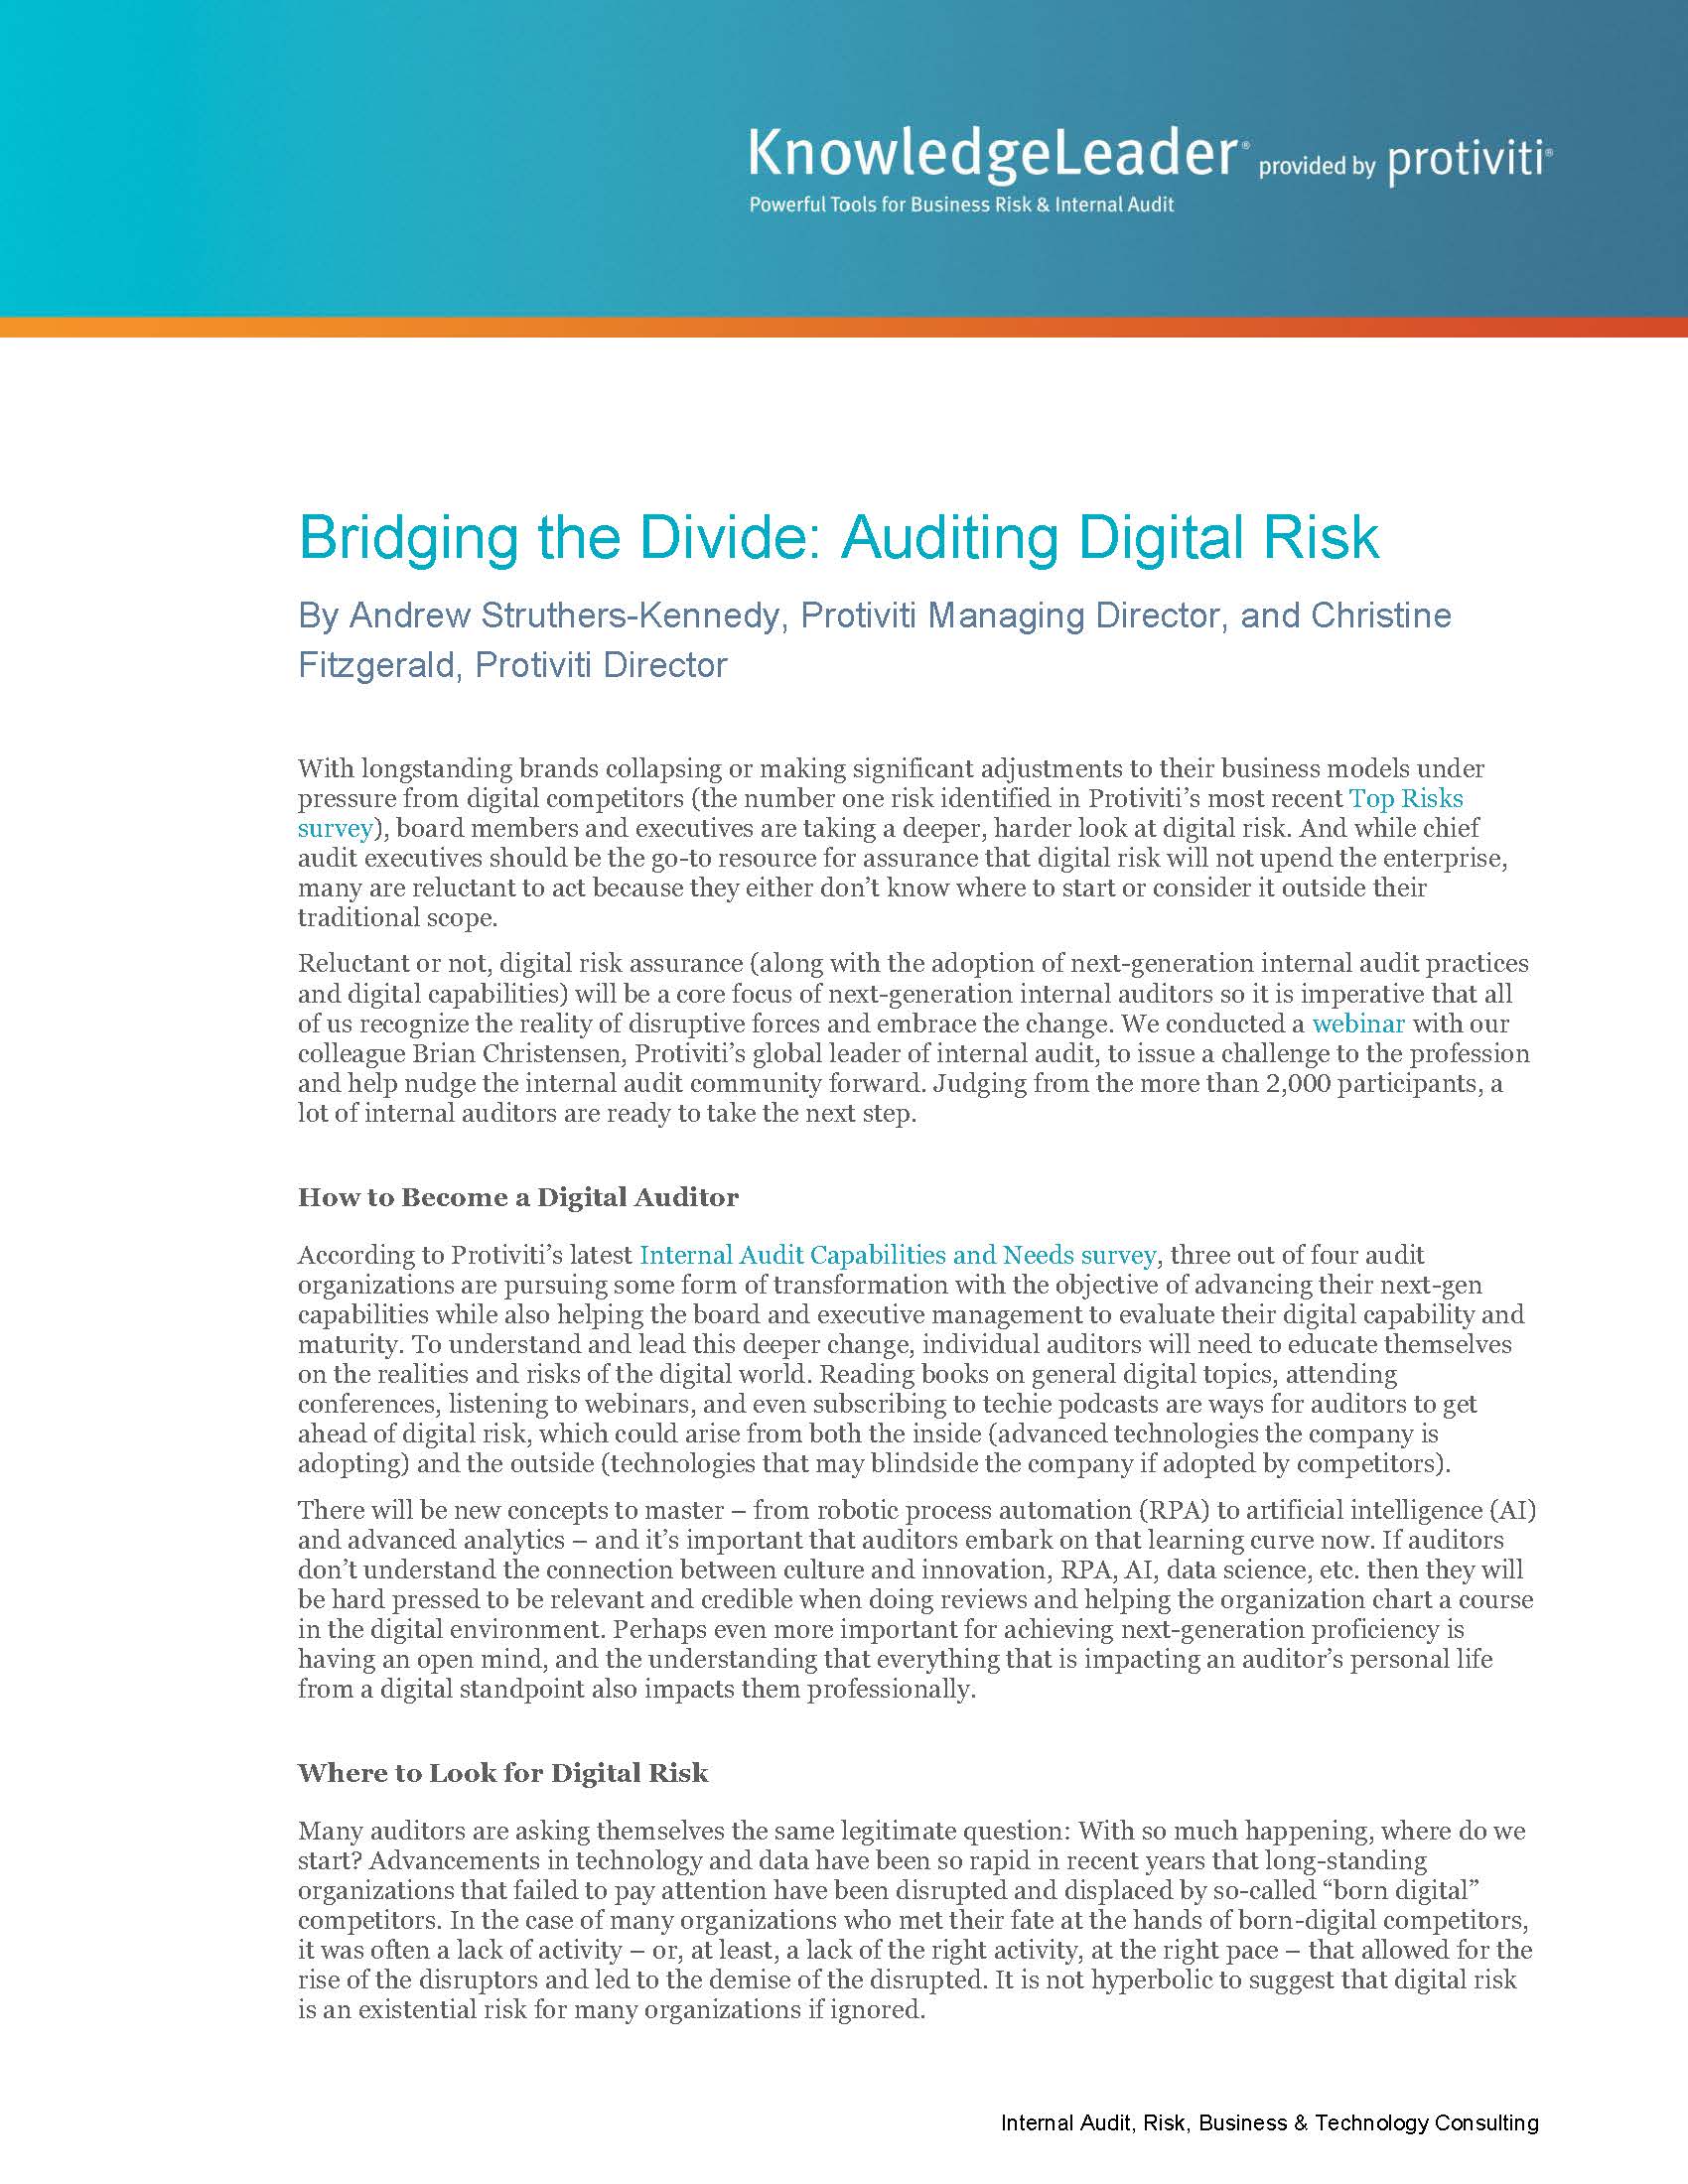 Screenshot of the first page of Bridging the Divide Auditing Digital Risk